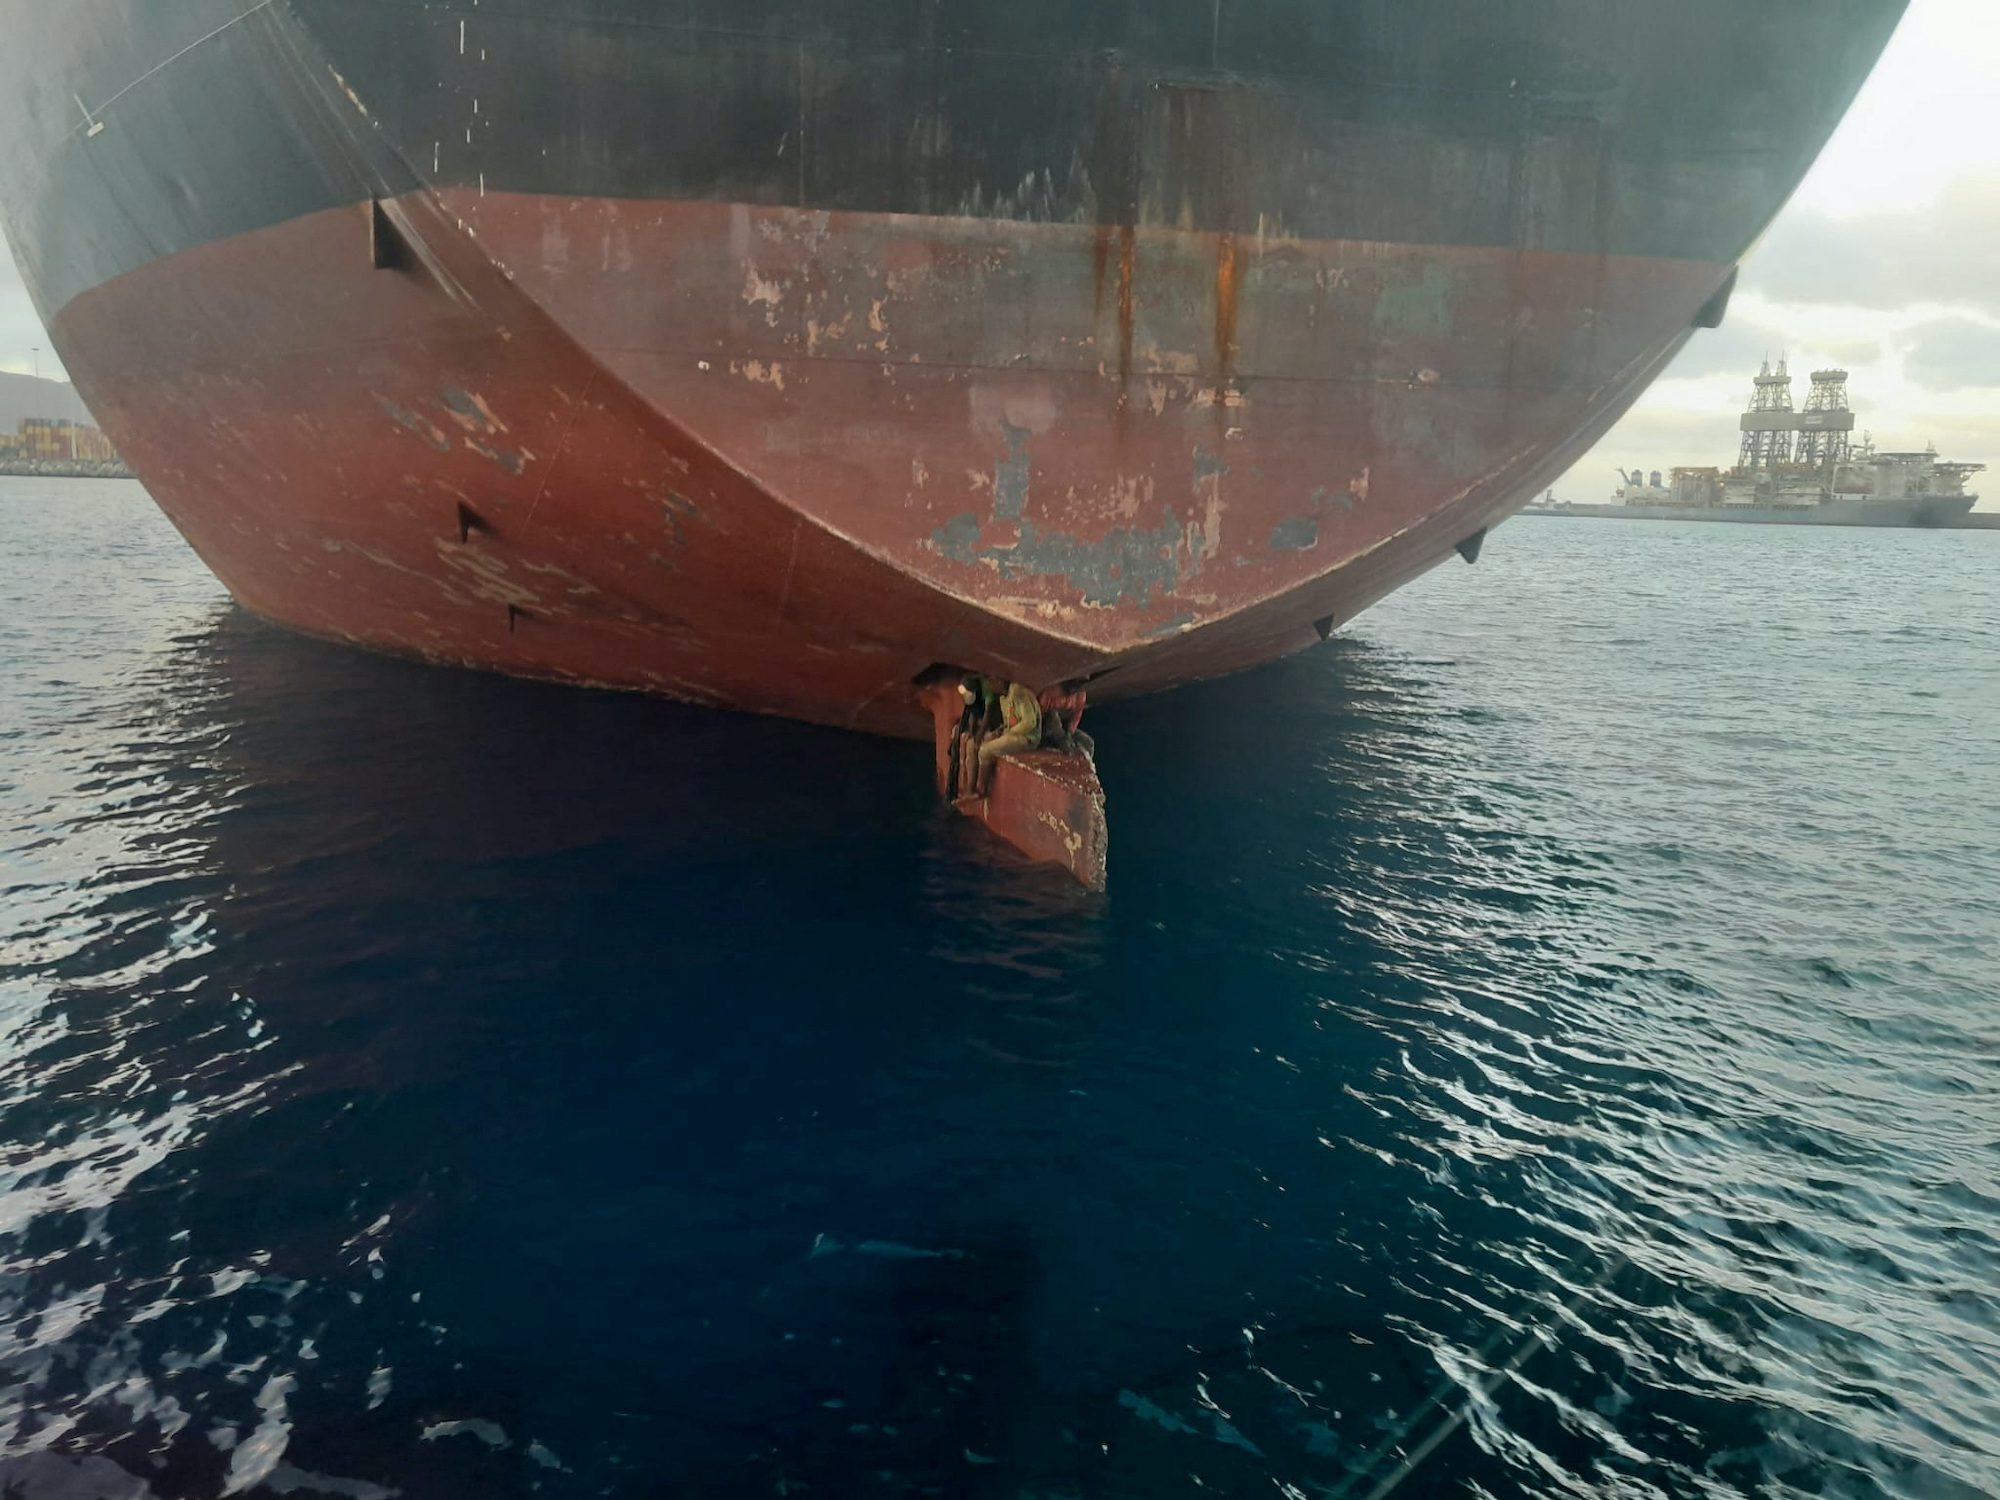 Stowaways Rescued from Ship’s Rudder After 11-Day Voyage